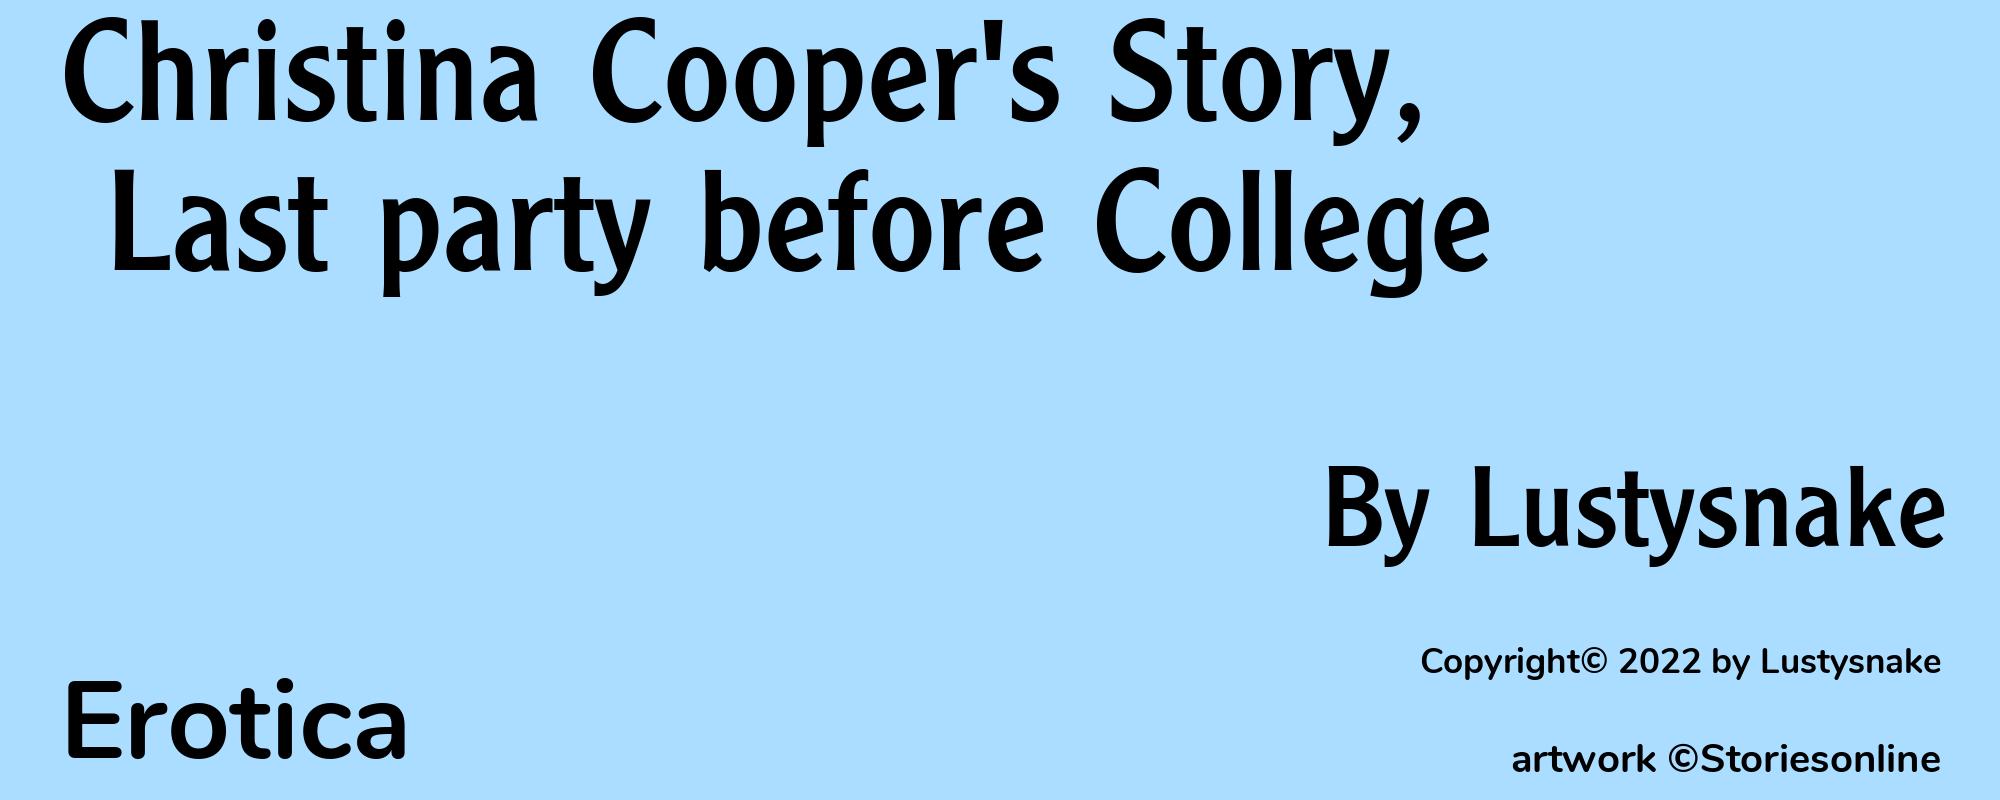 Christina Cooper's Story, Last party before College - Cover